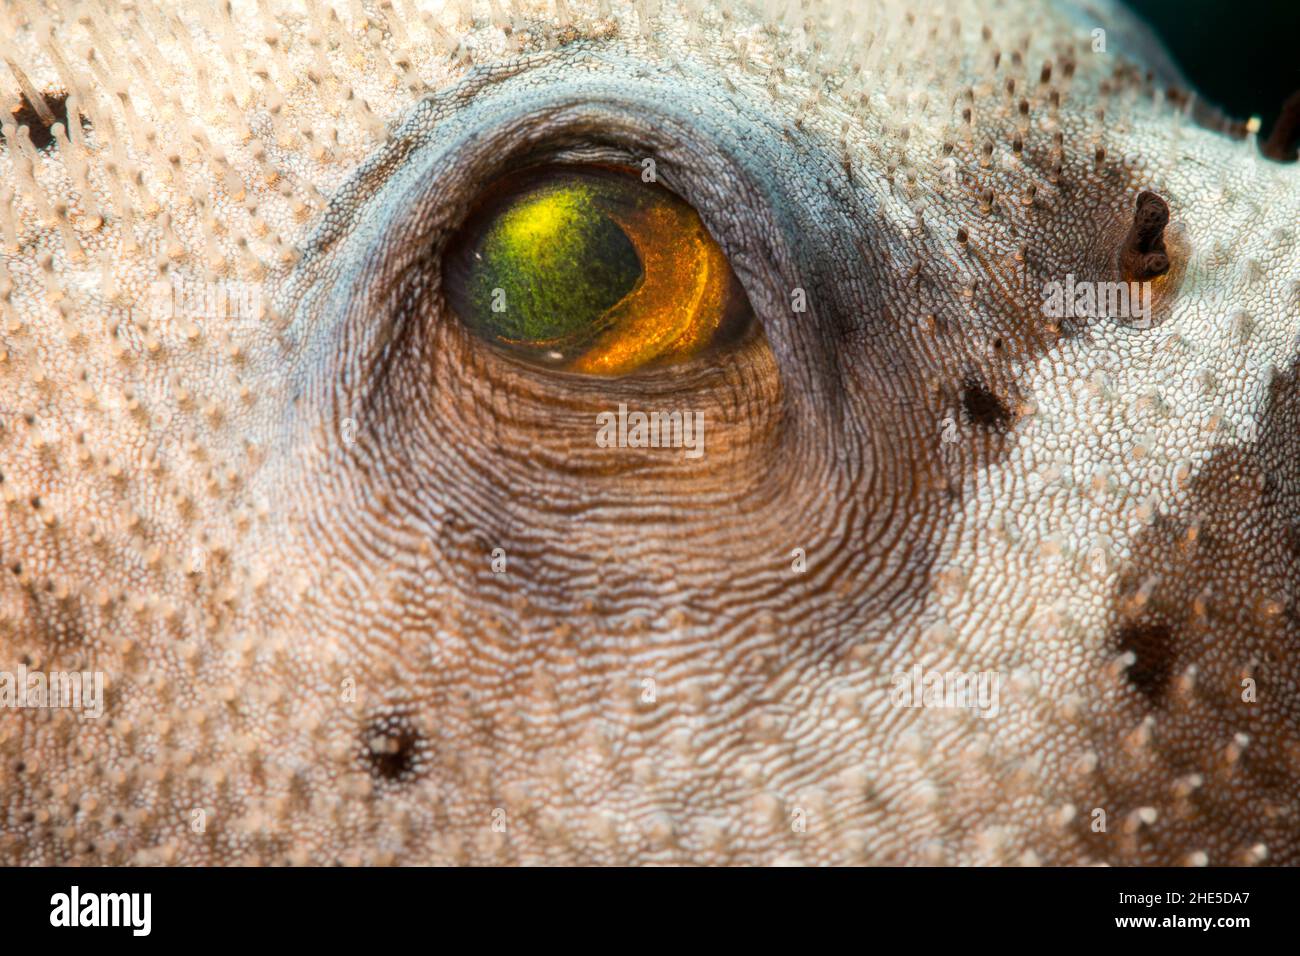 A close look at the eye of a blackspotted puffer or dog-faced puffer, Arothron nigropunctatus, Yap, Federated States of Micronesia. Stock Photo